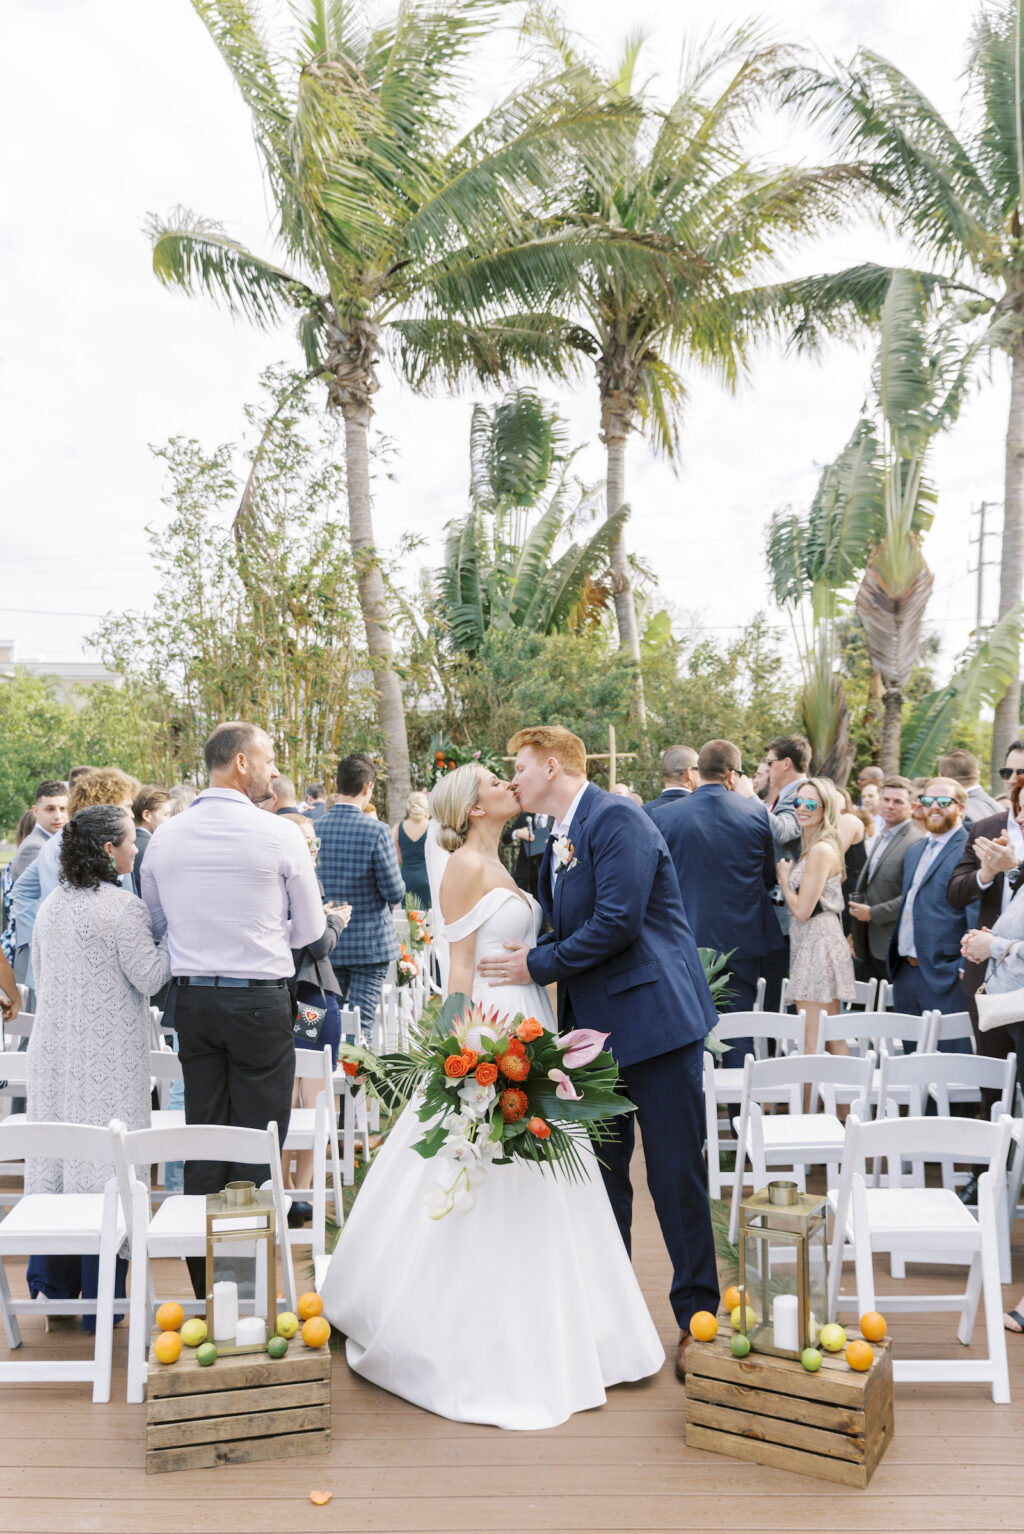 Tropical Pink and Green Wedding Ceremony | Bride and Groom Exchanging Kiss After Wedding Vows | Wooden Pallets with Oranges, Limes, and Lemon Fruits, Gold Lanterns Decor | Tampa Bay Wedding Planner Coastal Coordinating | Outdoor Courtyard St. Pete Wedding Venue Hotel Zamora